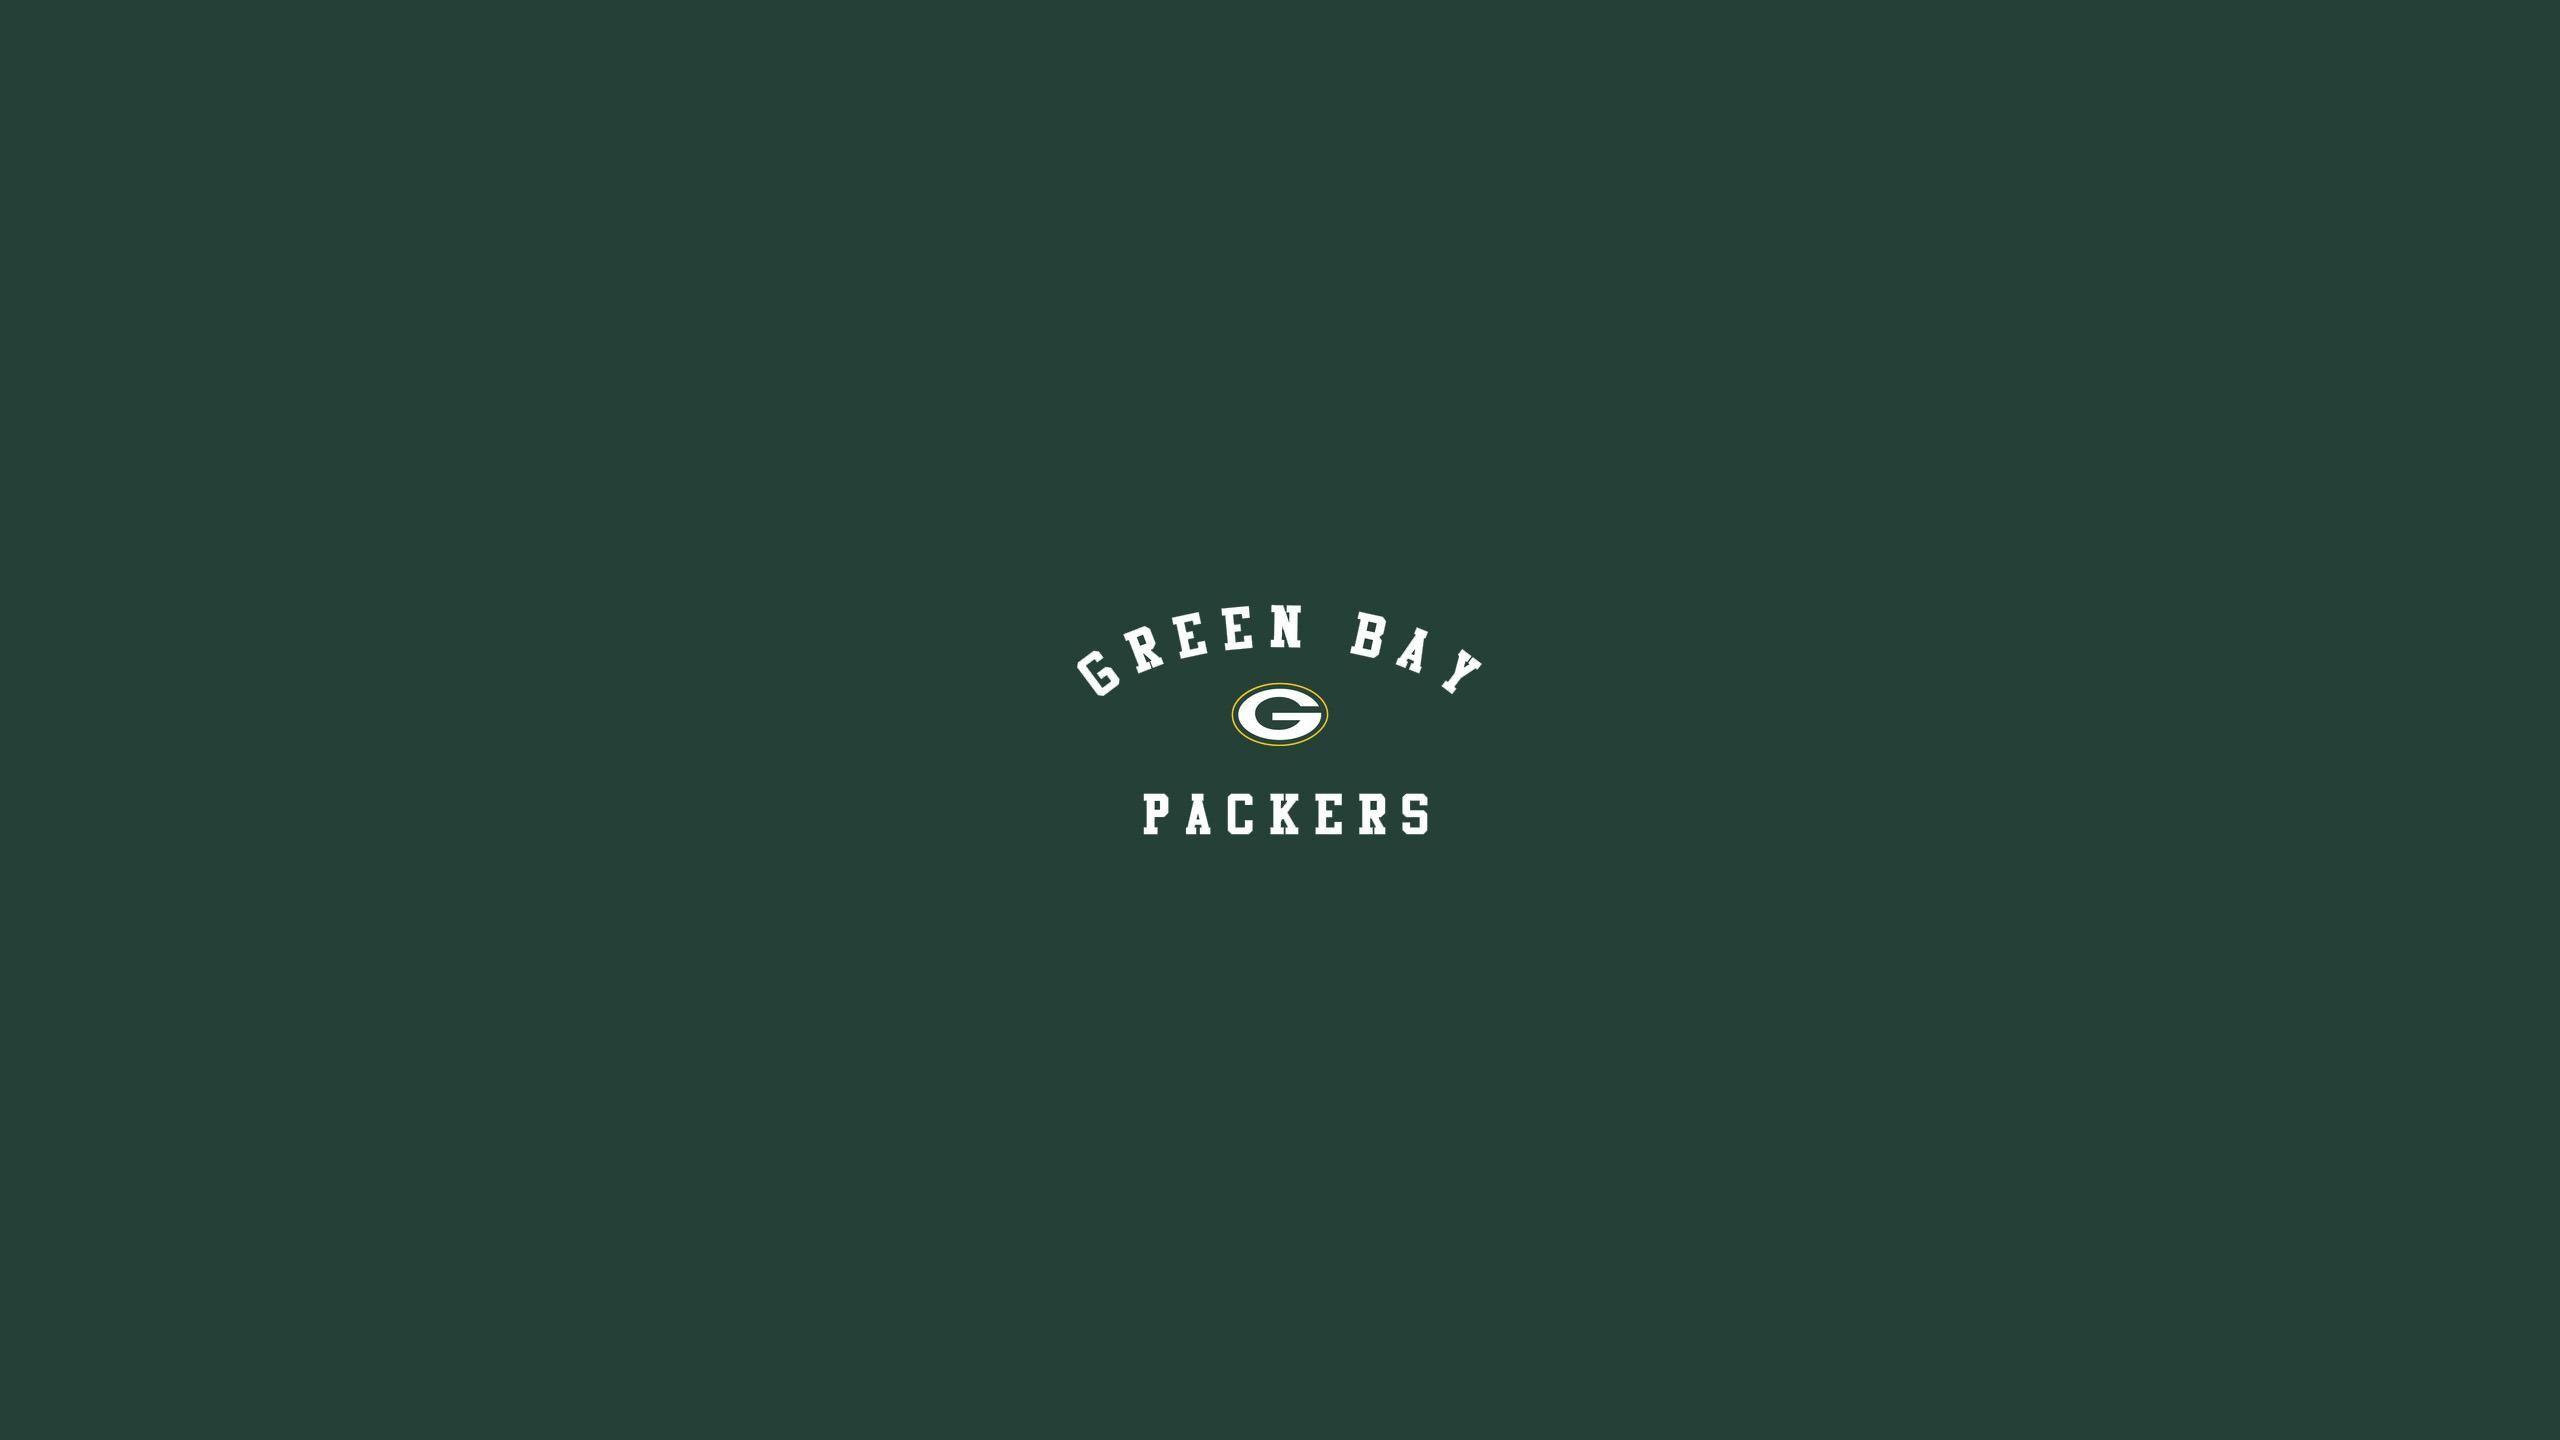 Bay Packers Green Green bay packers Sports Football NFL HD